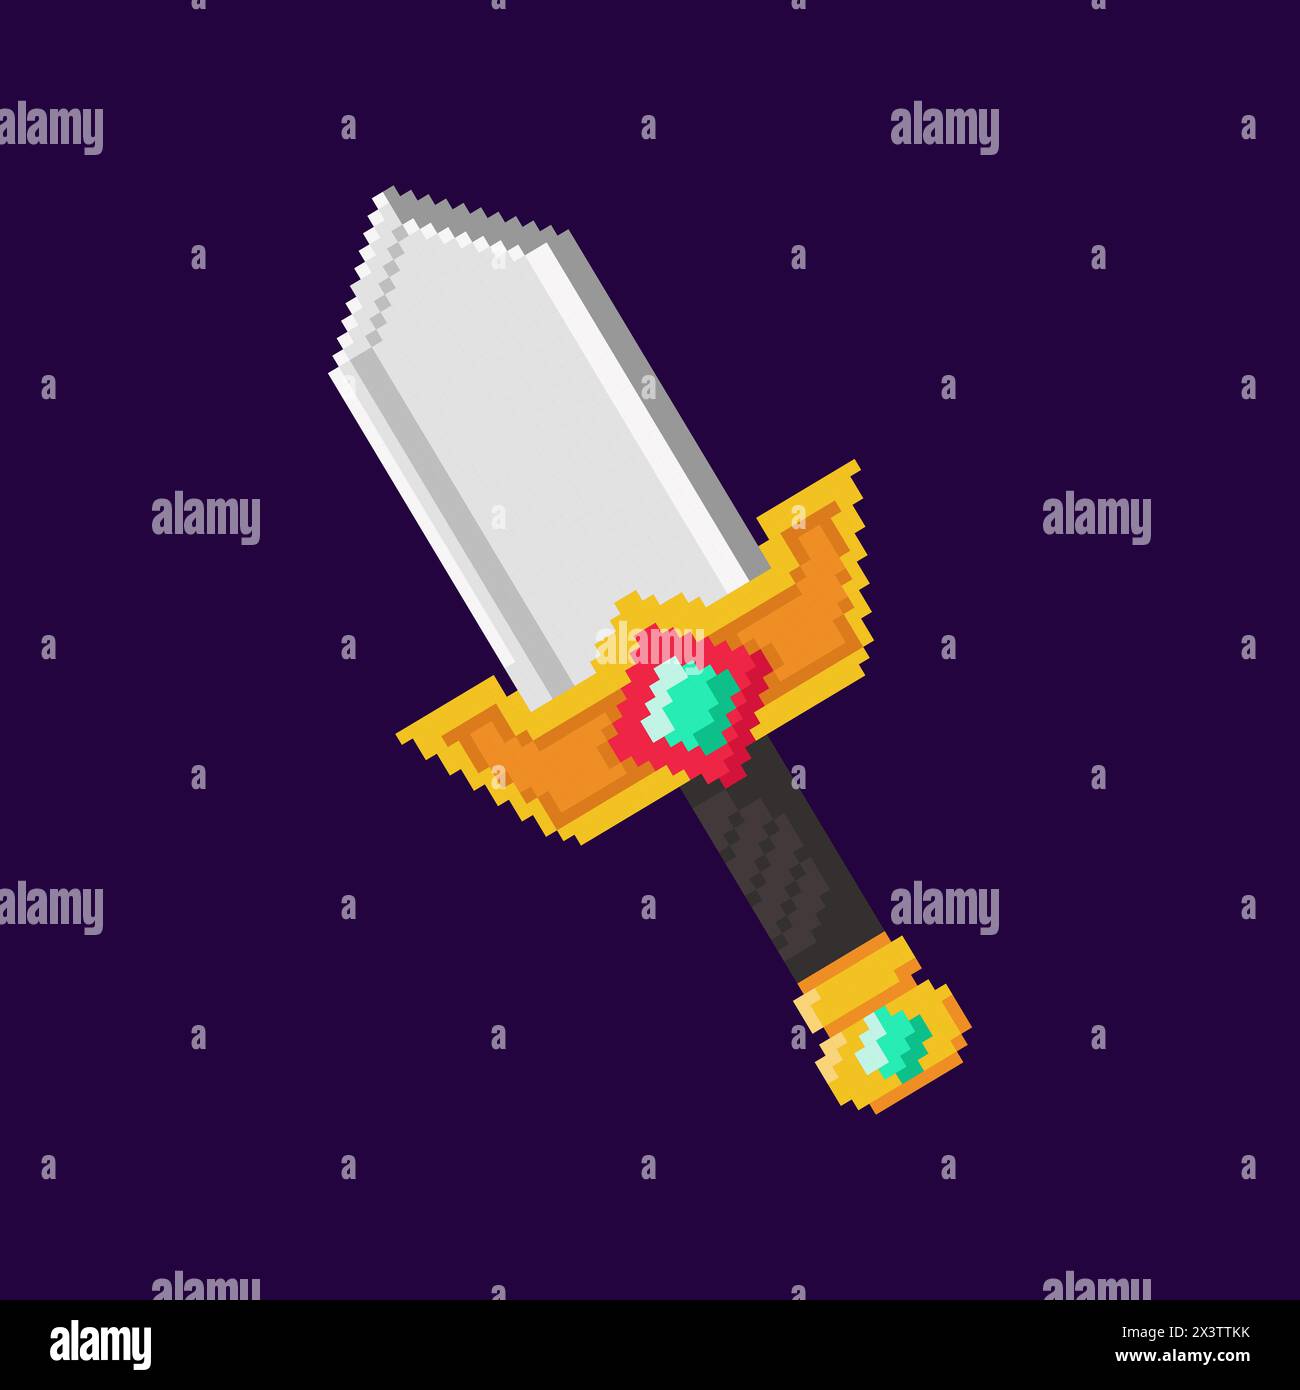 Vector Illustration of Sword with Pixel Art Design, perfect for game assets themed designs Stock Vector